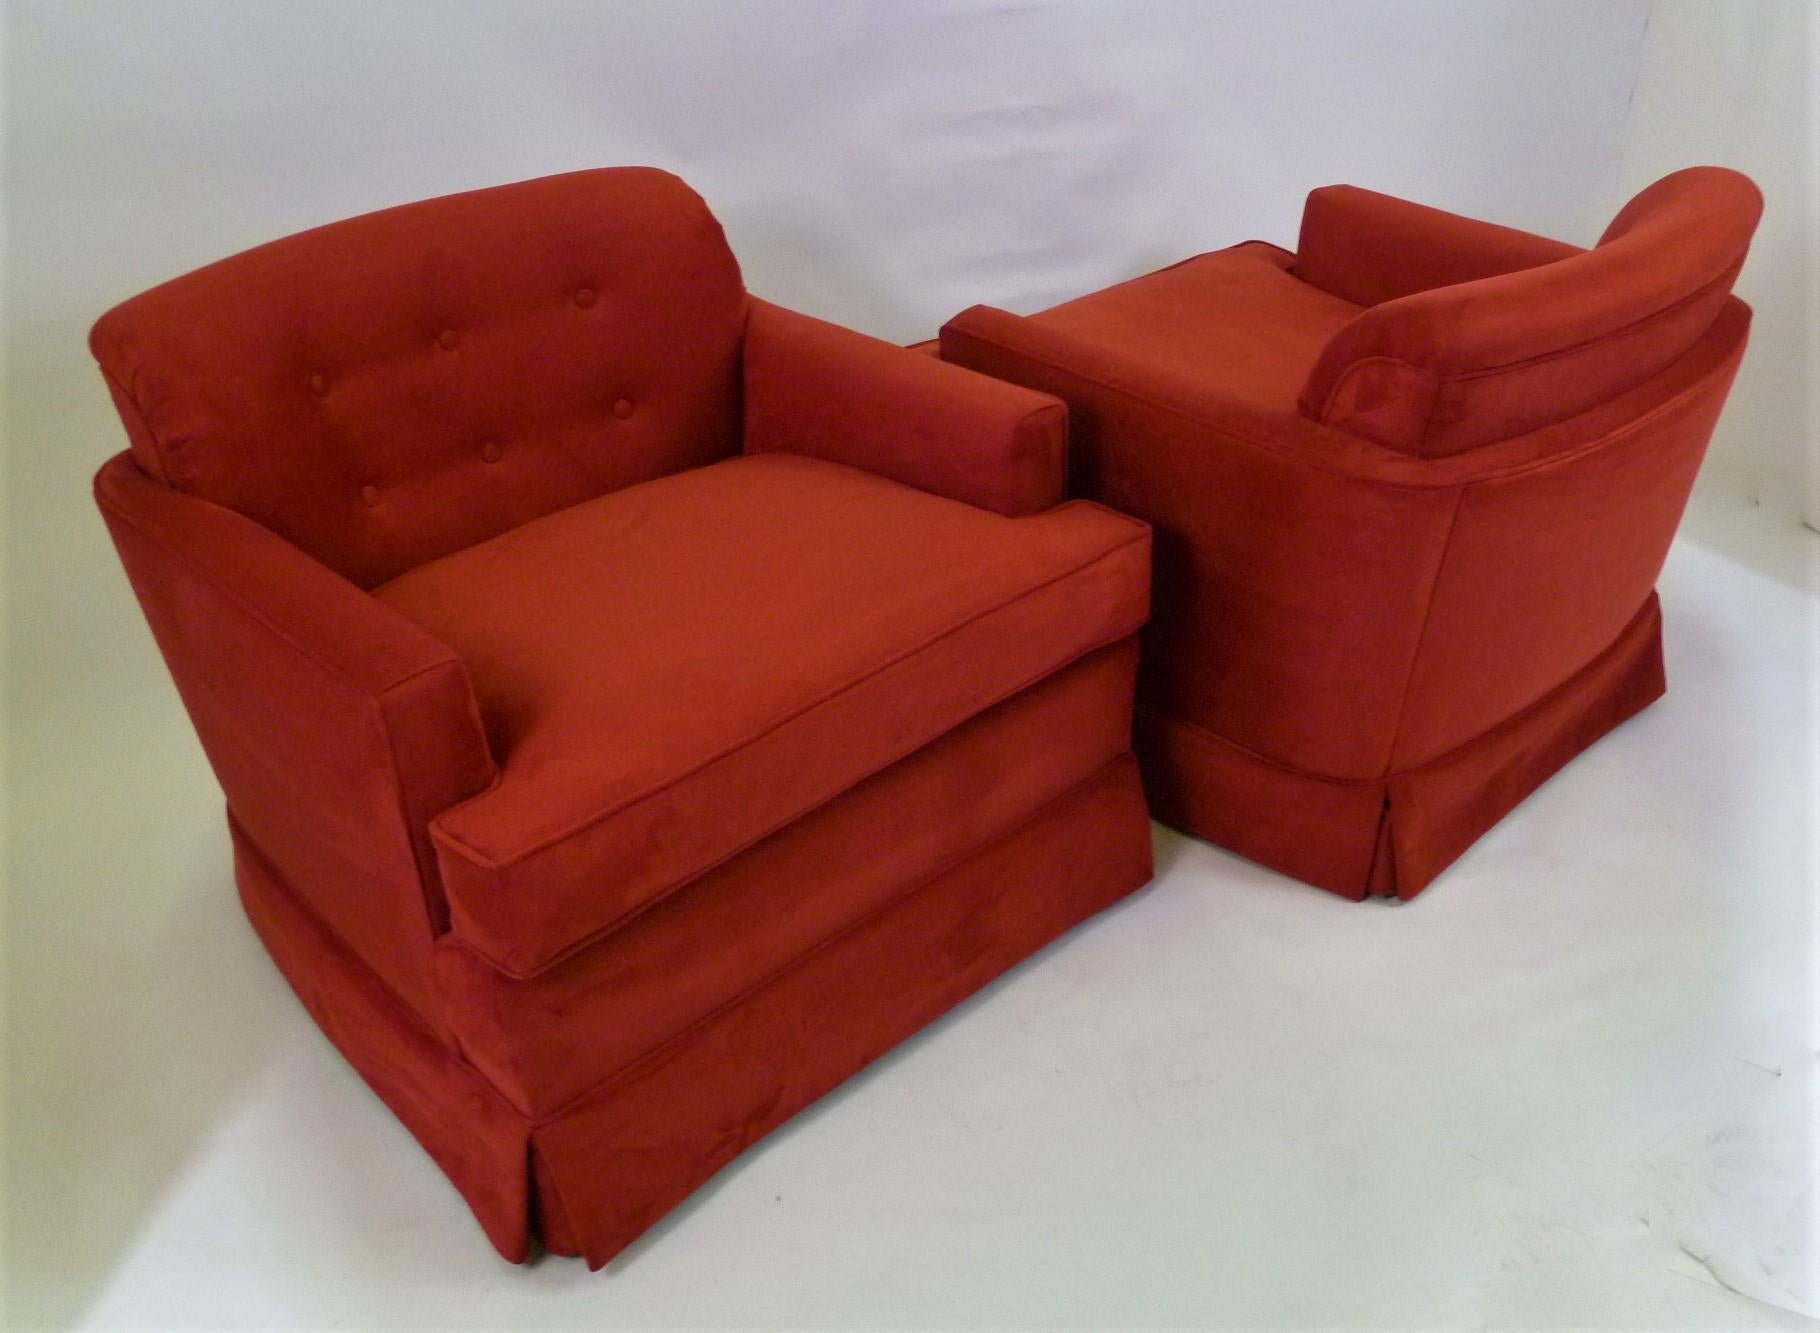 American Pair of 1940s Hollywood Glamour Club Chairs in Red Ultrasuede